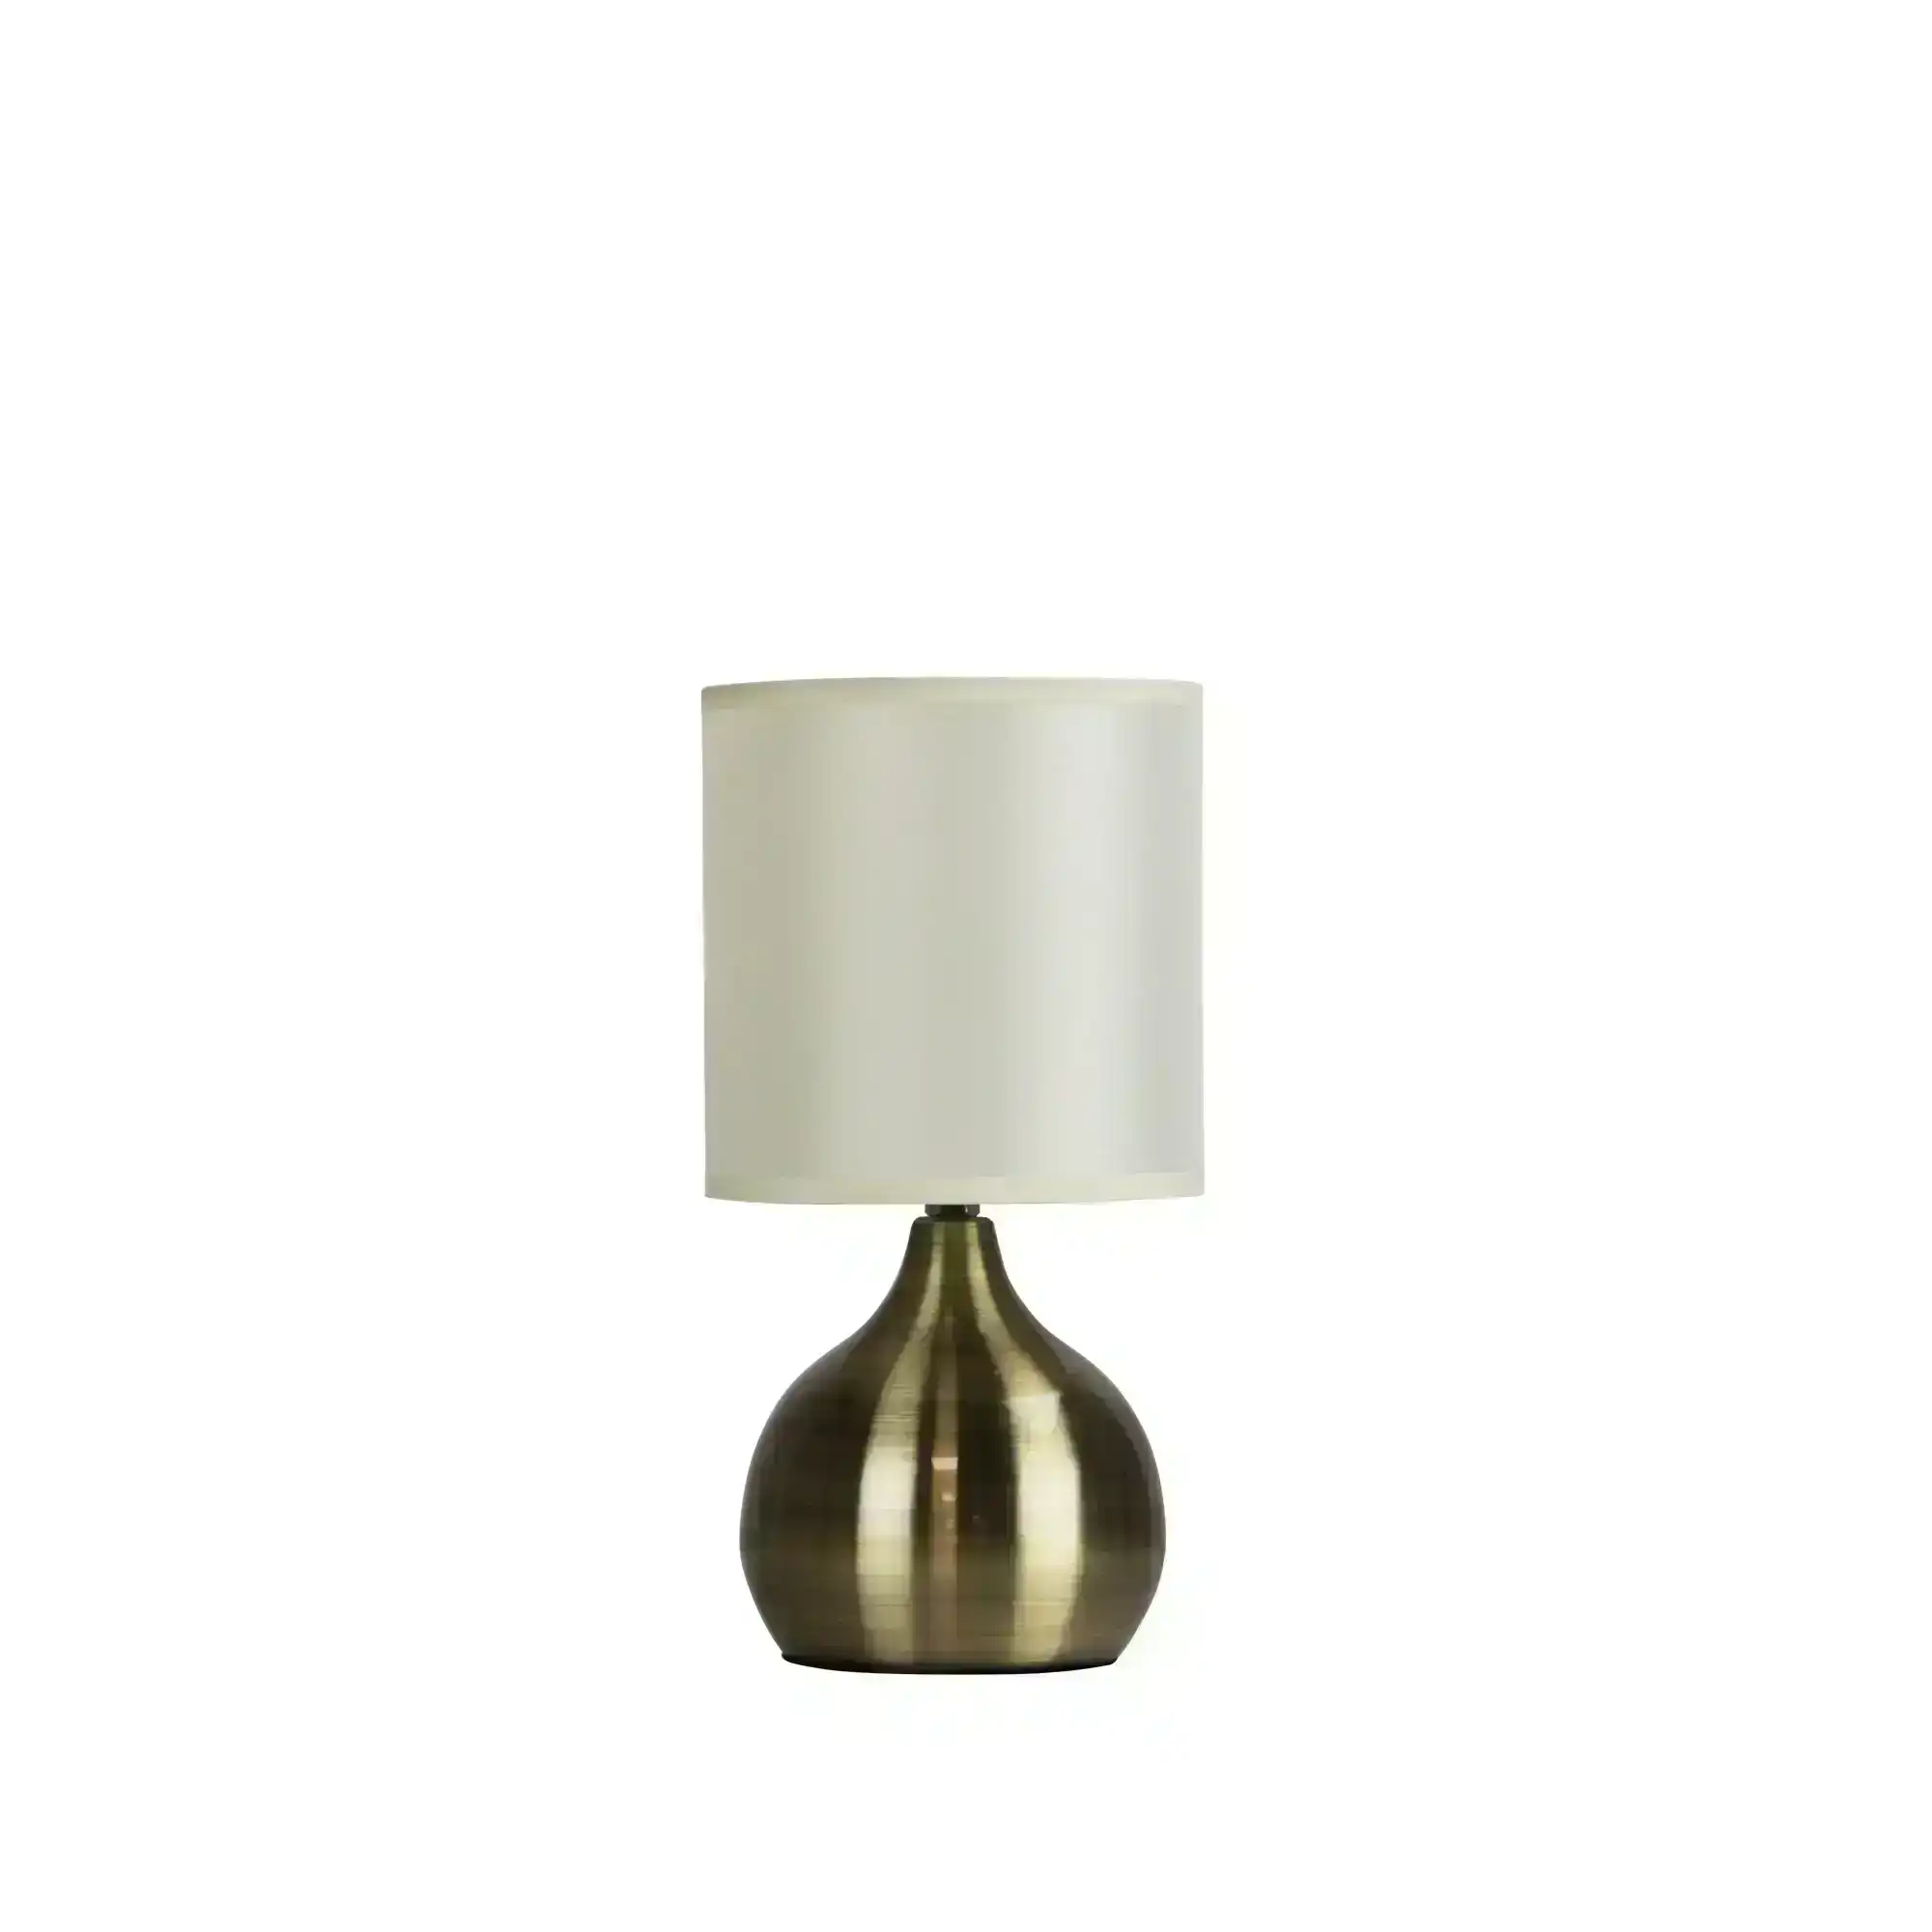 LOTTI ON / OFF Touch Lamp in Antique Brass Finish